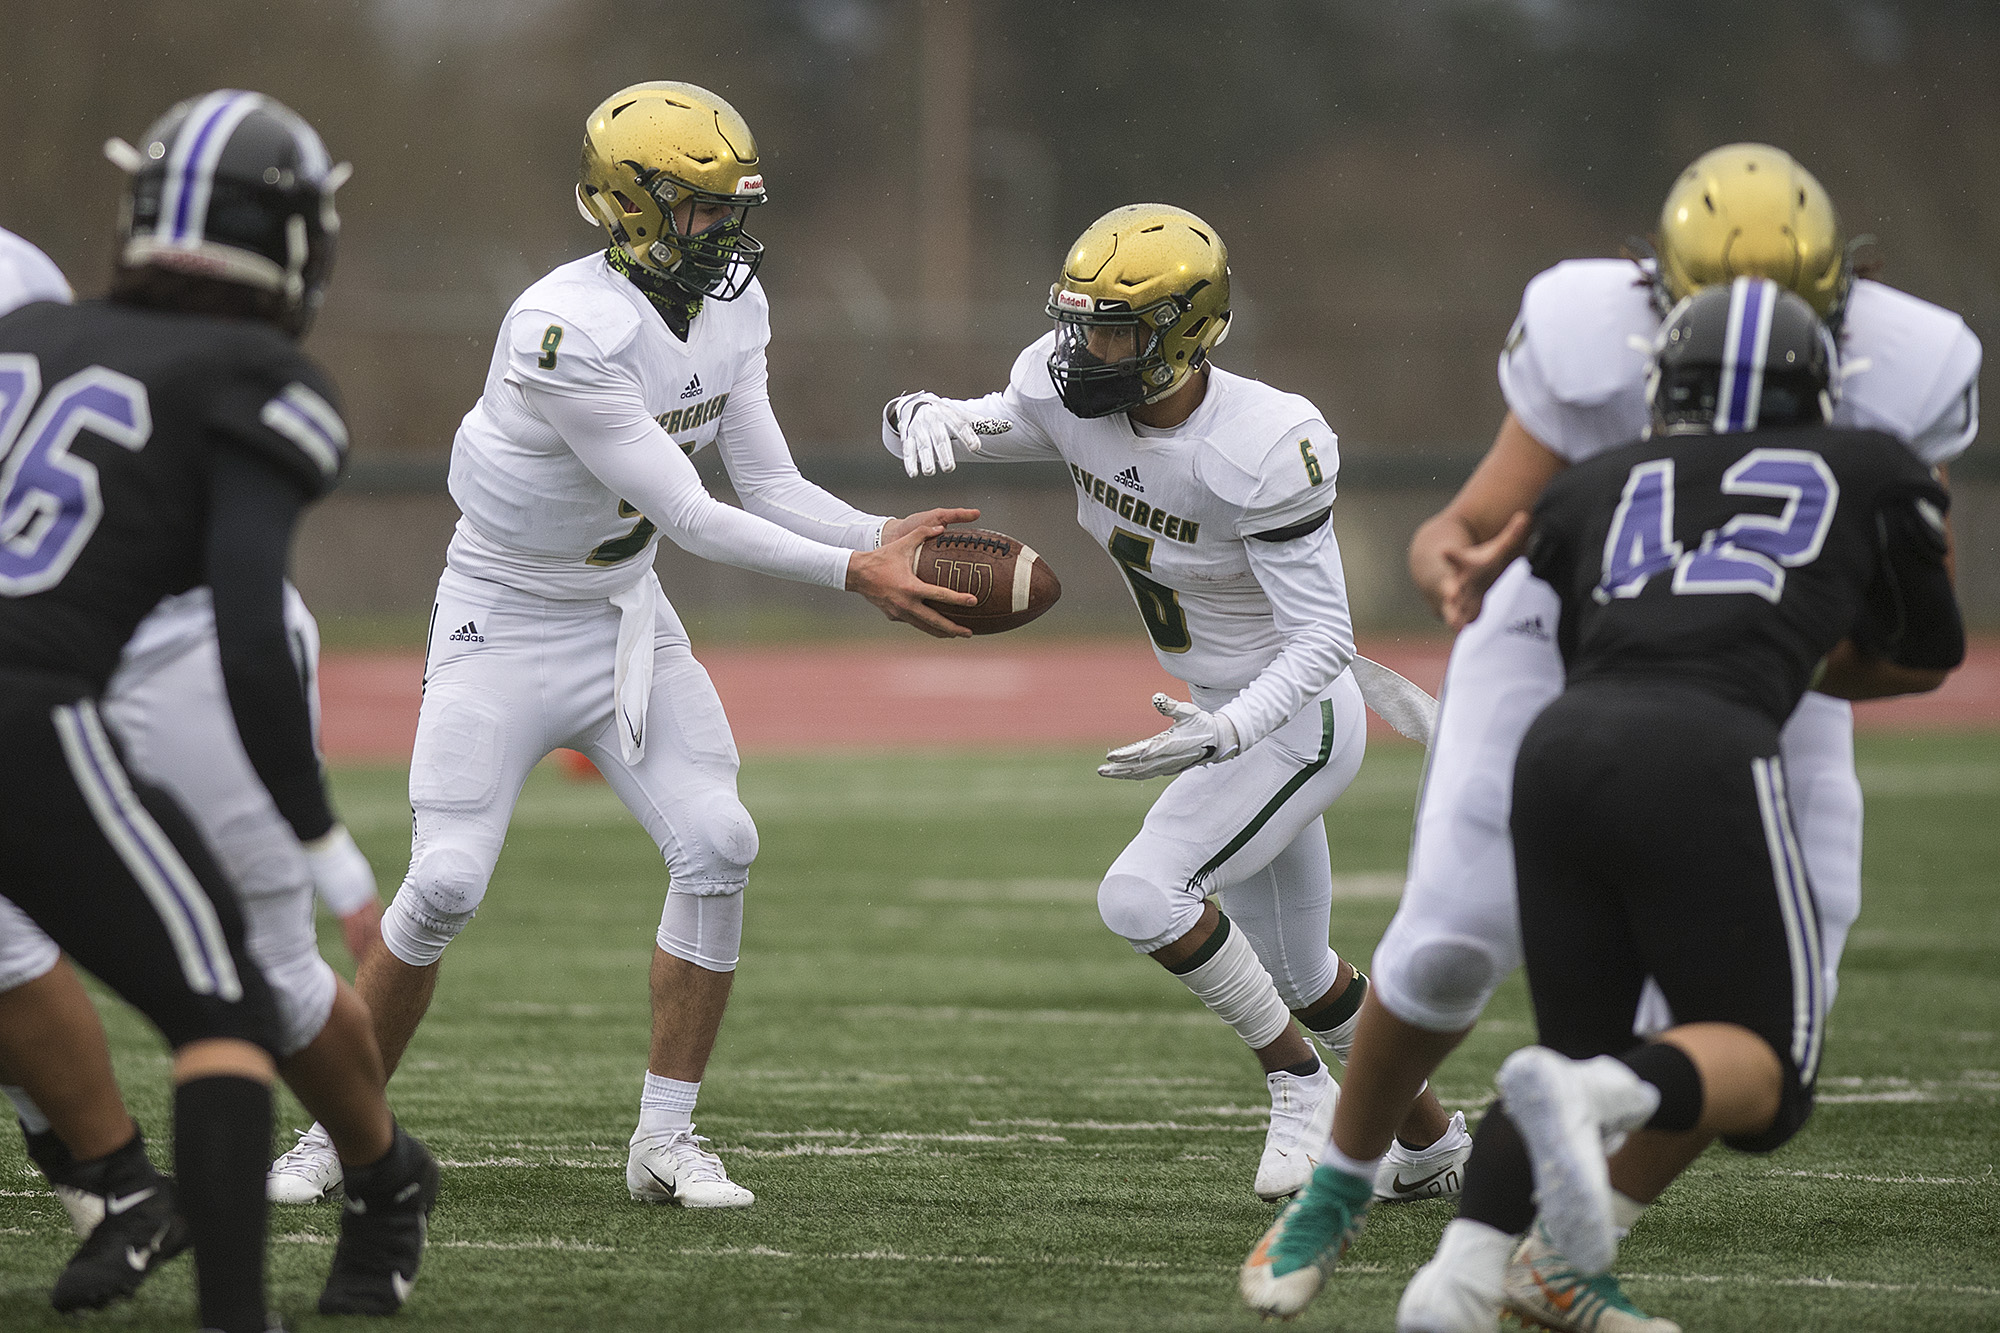 Evergreen's JJ Woodin (9) hands off to teammate O'Shay Jackson (6) in the first quarter at McKenzie Stadium on Friday afternoon, March 5, 2021.